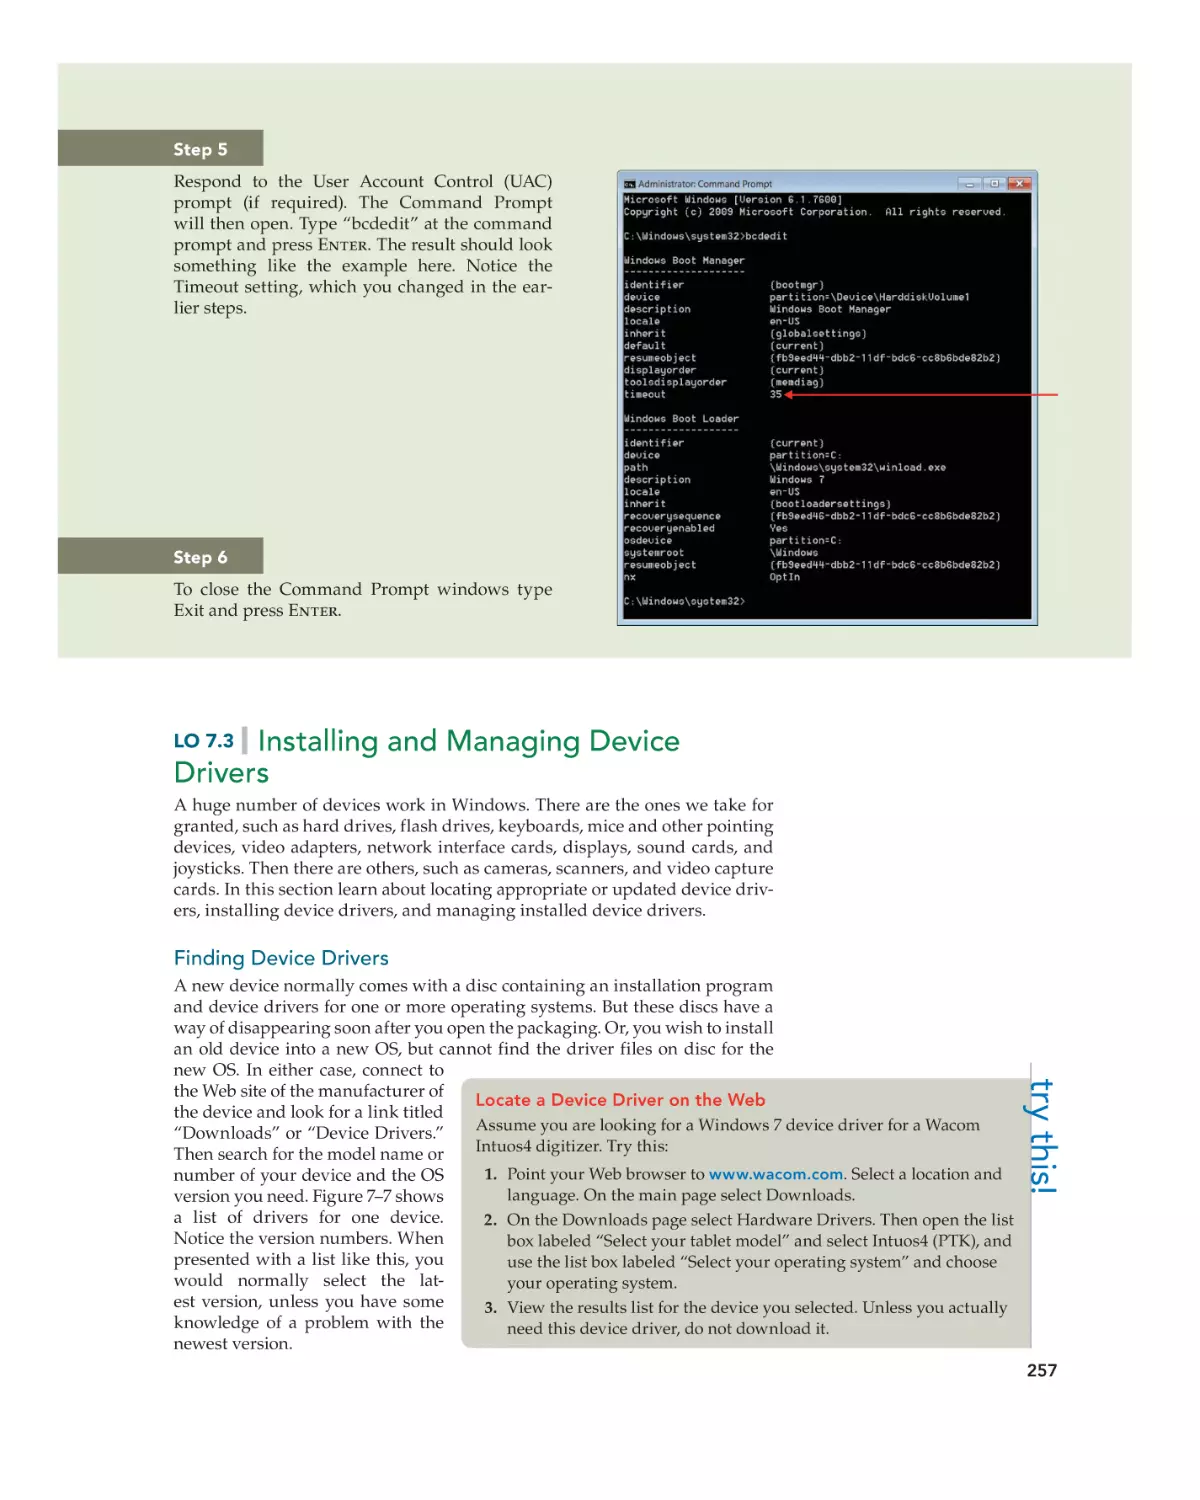 Installing and Managing Device Drivers
Finding Device Drivers